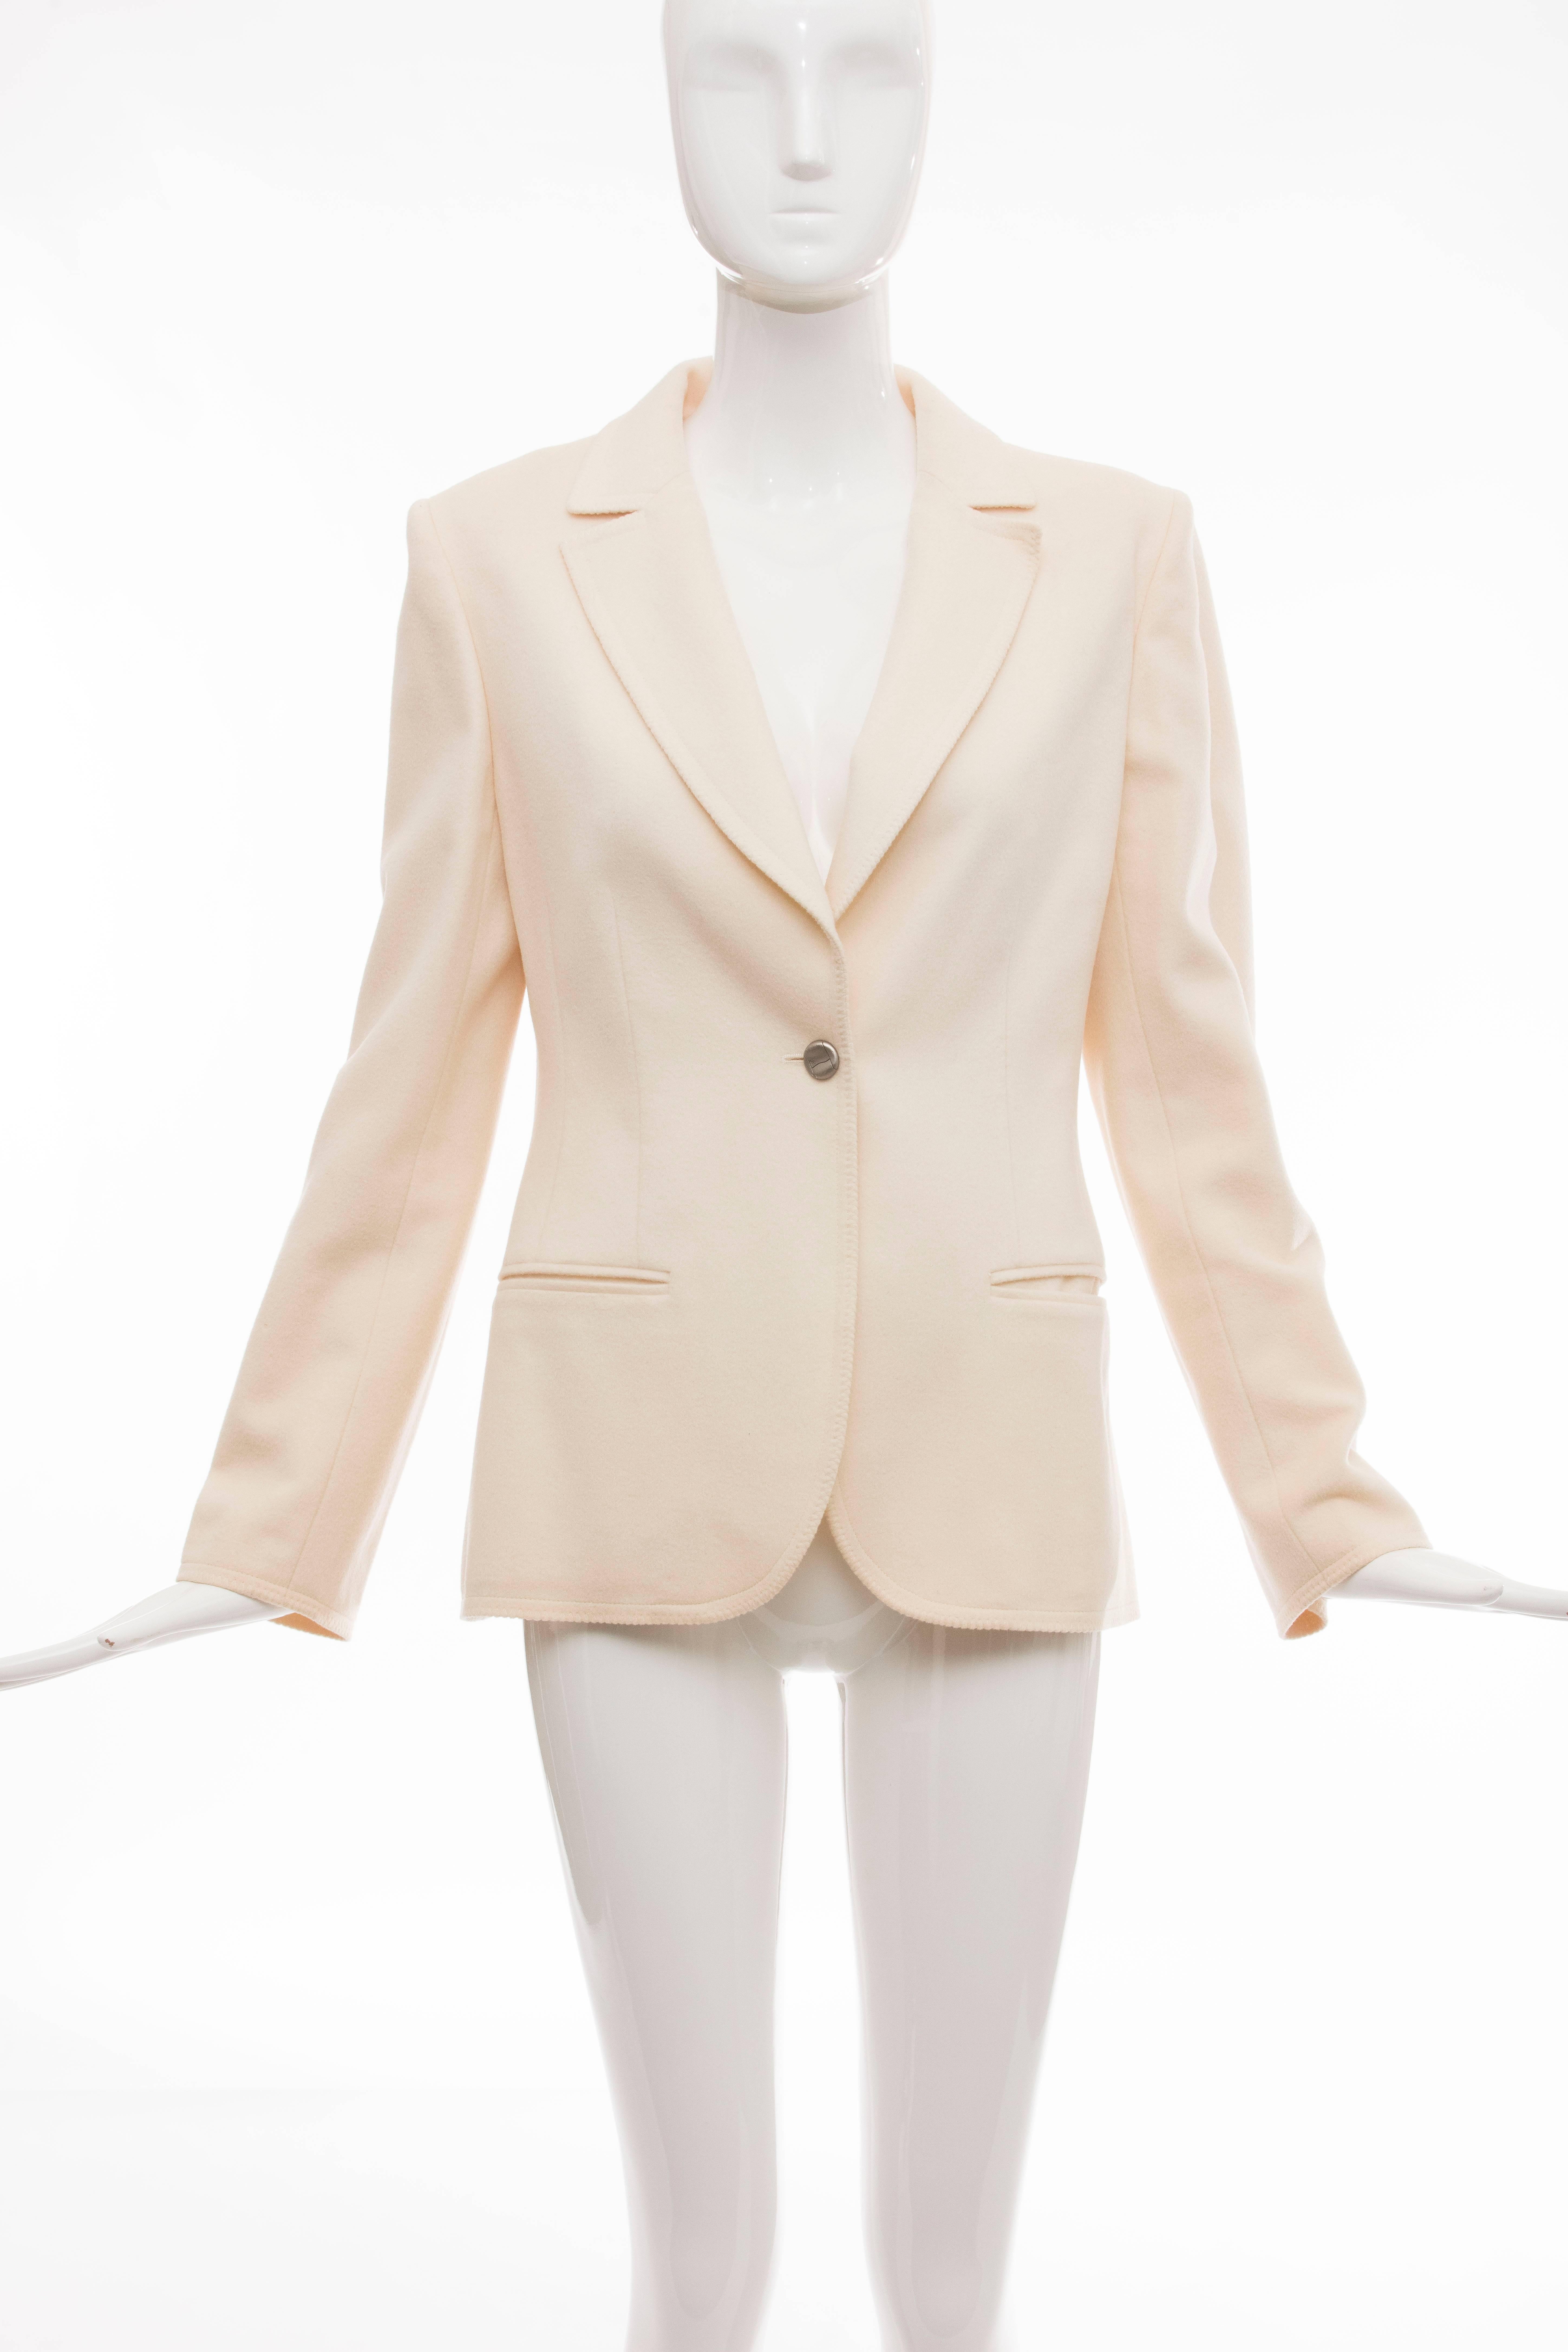 Chanel, Pre-Fall 1998 cream wool button front jacket, two front pockets and fully lined in signature CC silk.

EU. 42

Bust 34, Waist 32, Sleeve 24, Length 27